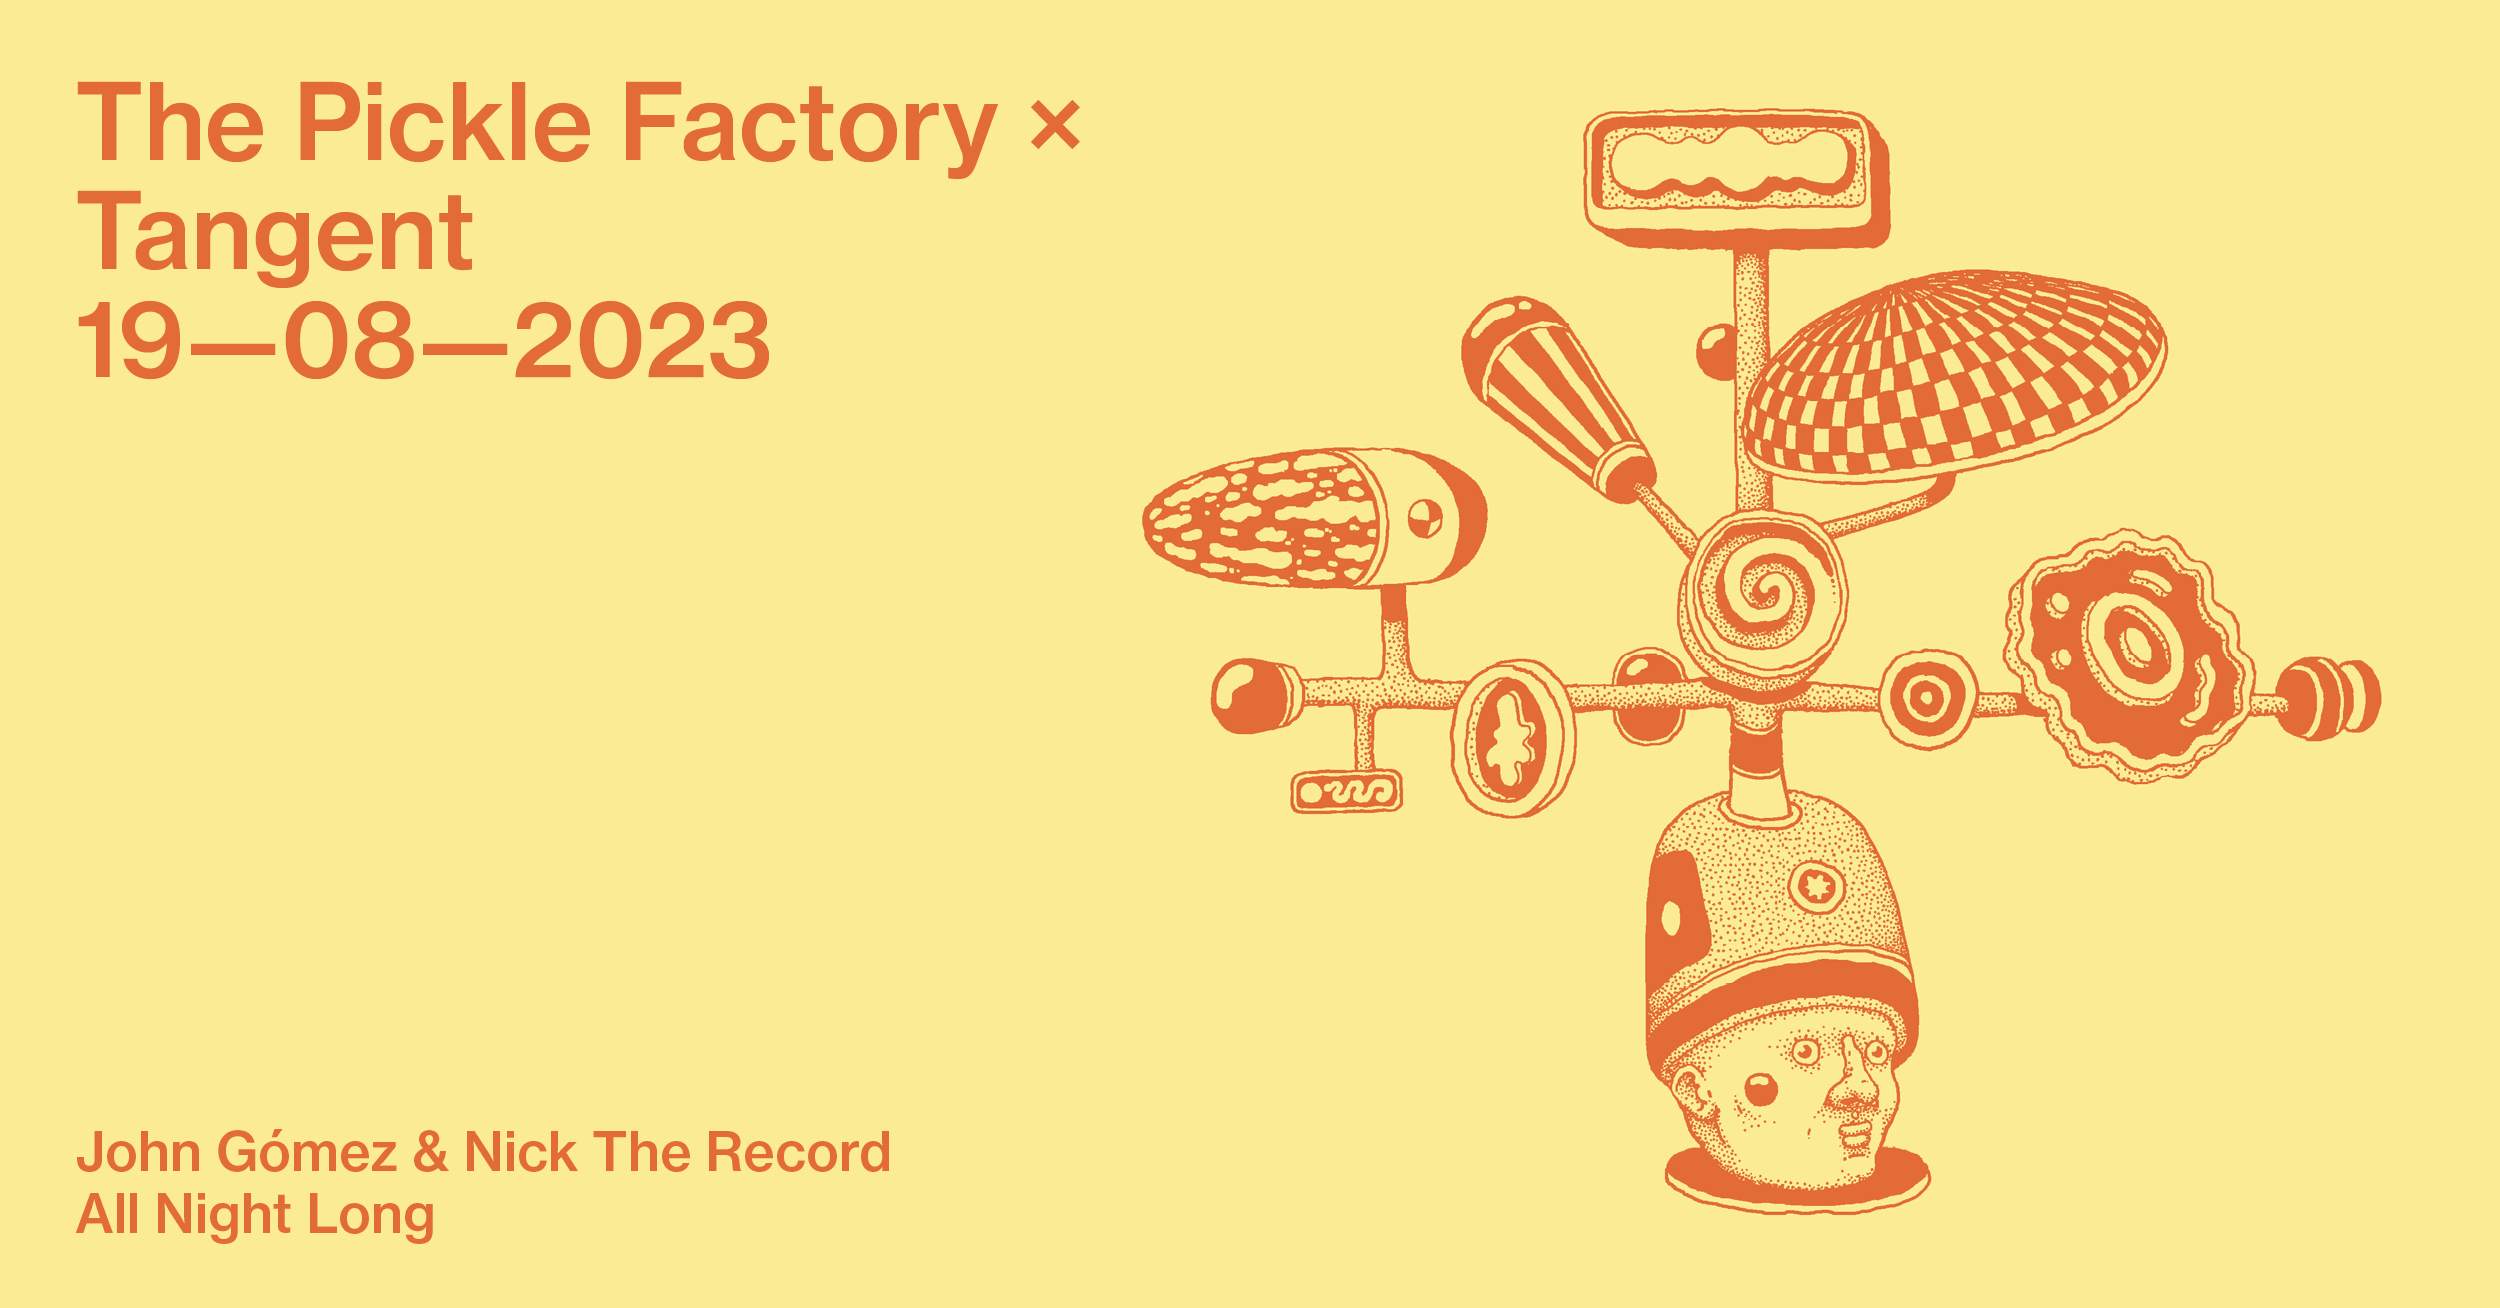 The Pickle Factory x Tangent with John Gómez & Nick The Record All Night Long - フライヤー表